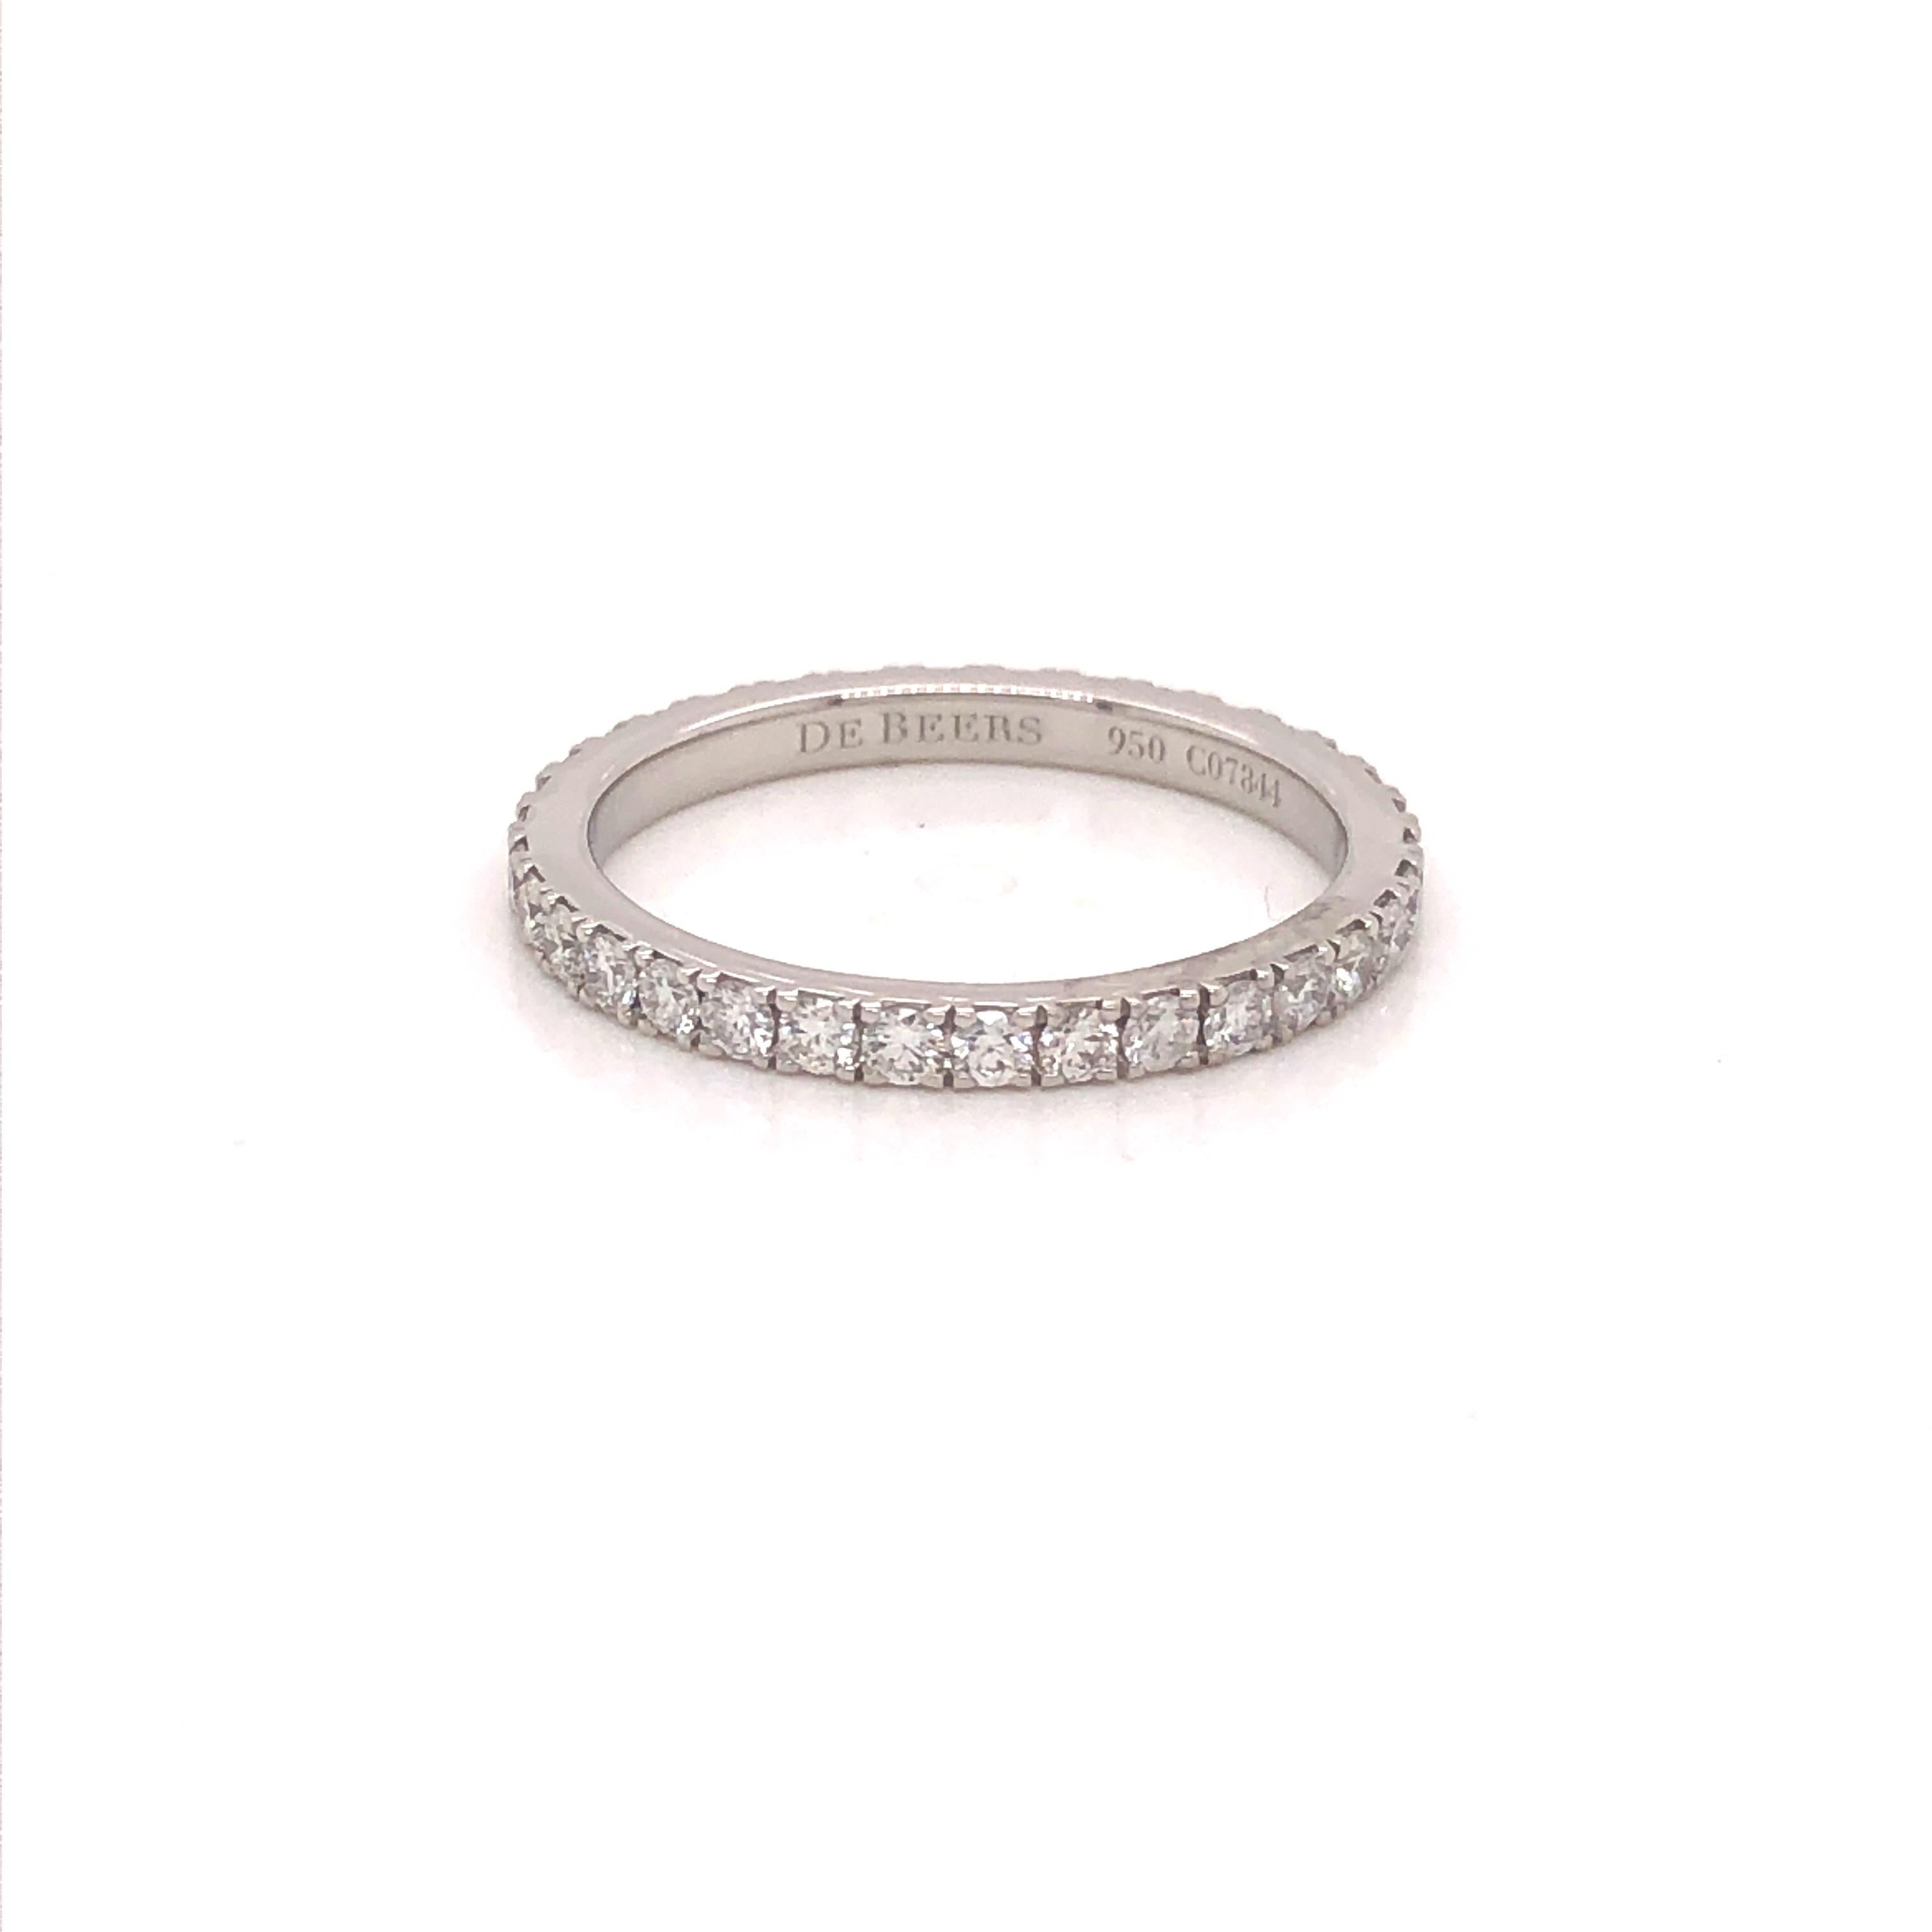 Timeless design from the most prominent Diamond house in the world.
This De Beers eternity band is crafted in Platinum, a size 47 (4), and set with a total of 34 Diamonds weighing 0.525 ct. Hallmarked by designer and marked with Serial # C07844.
In